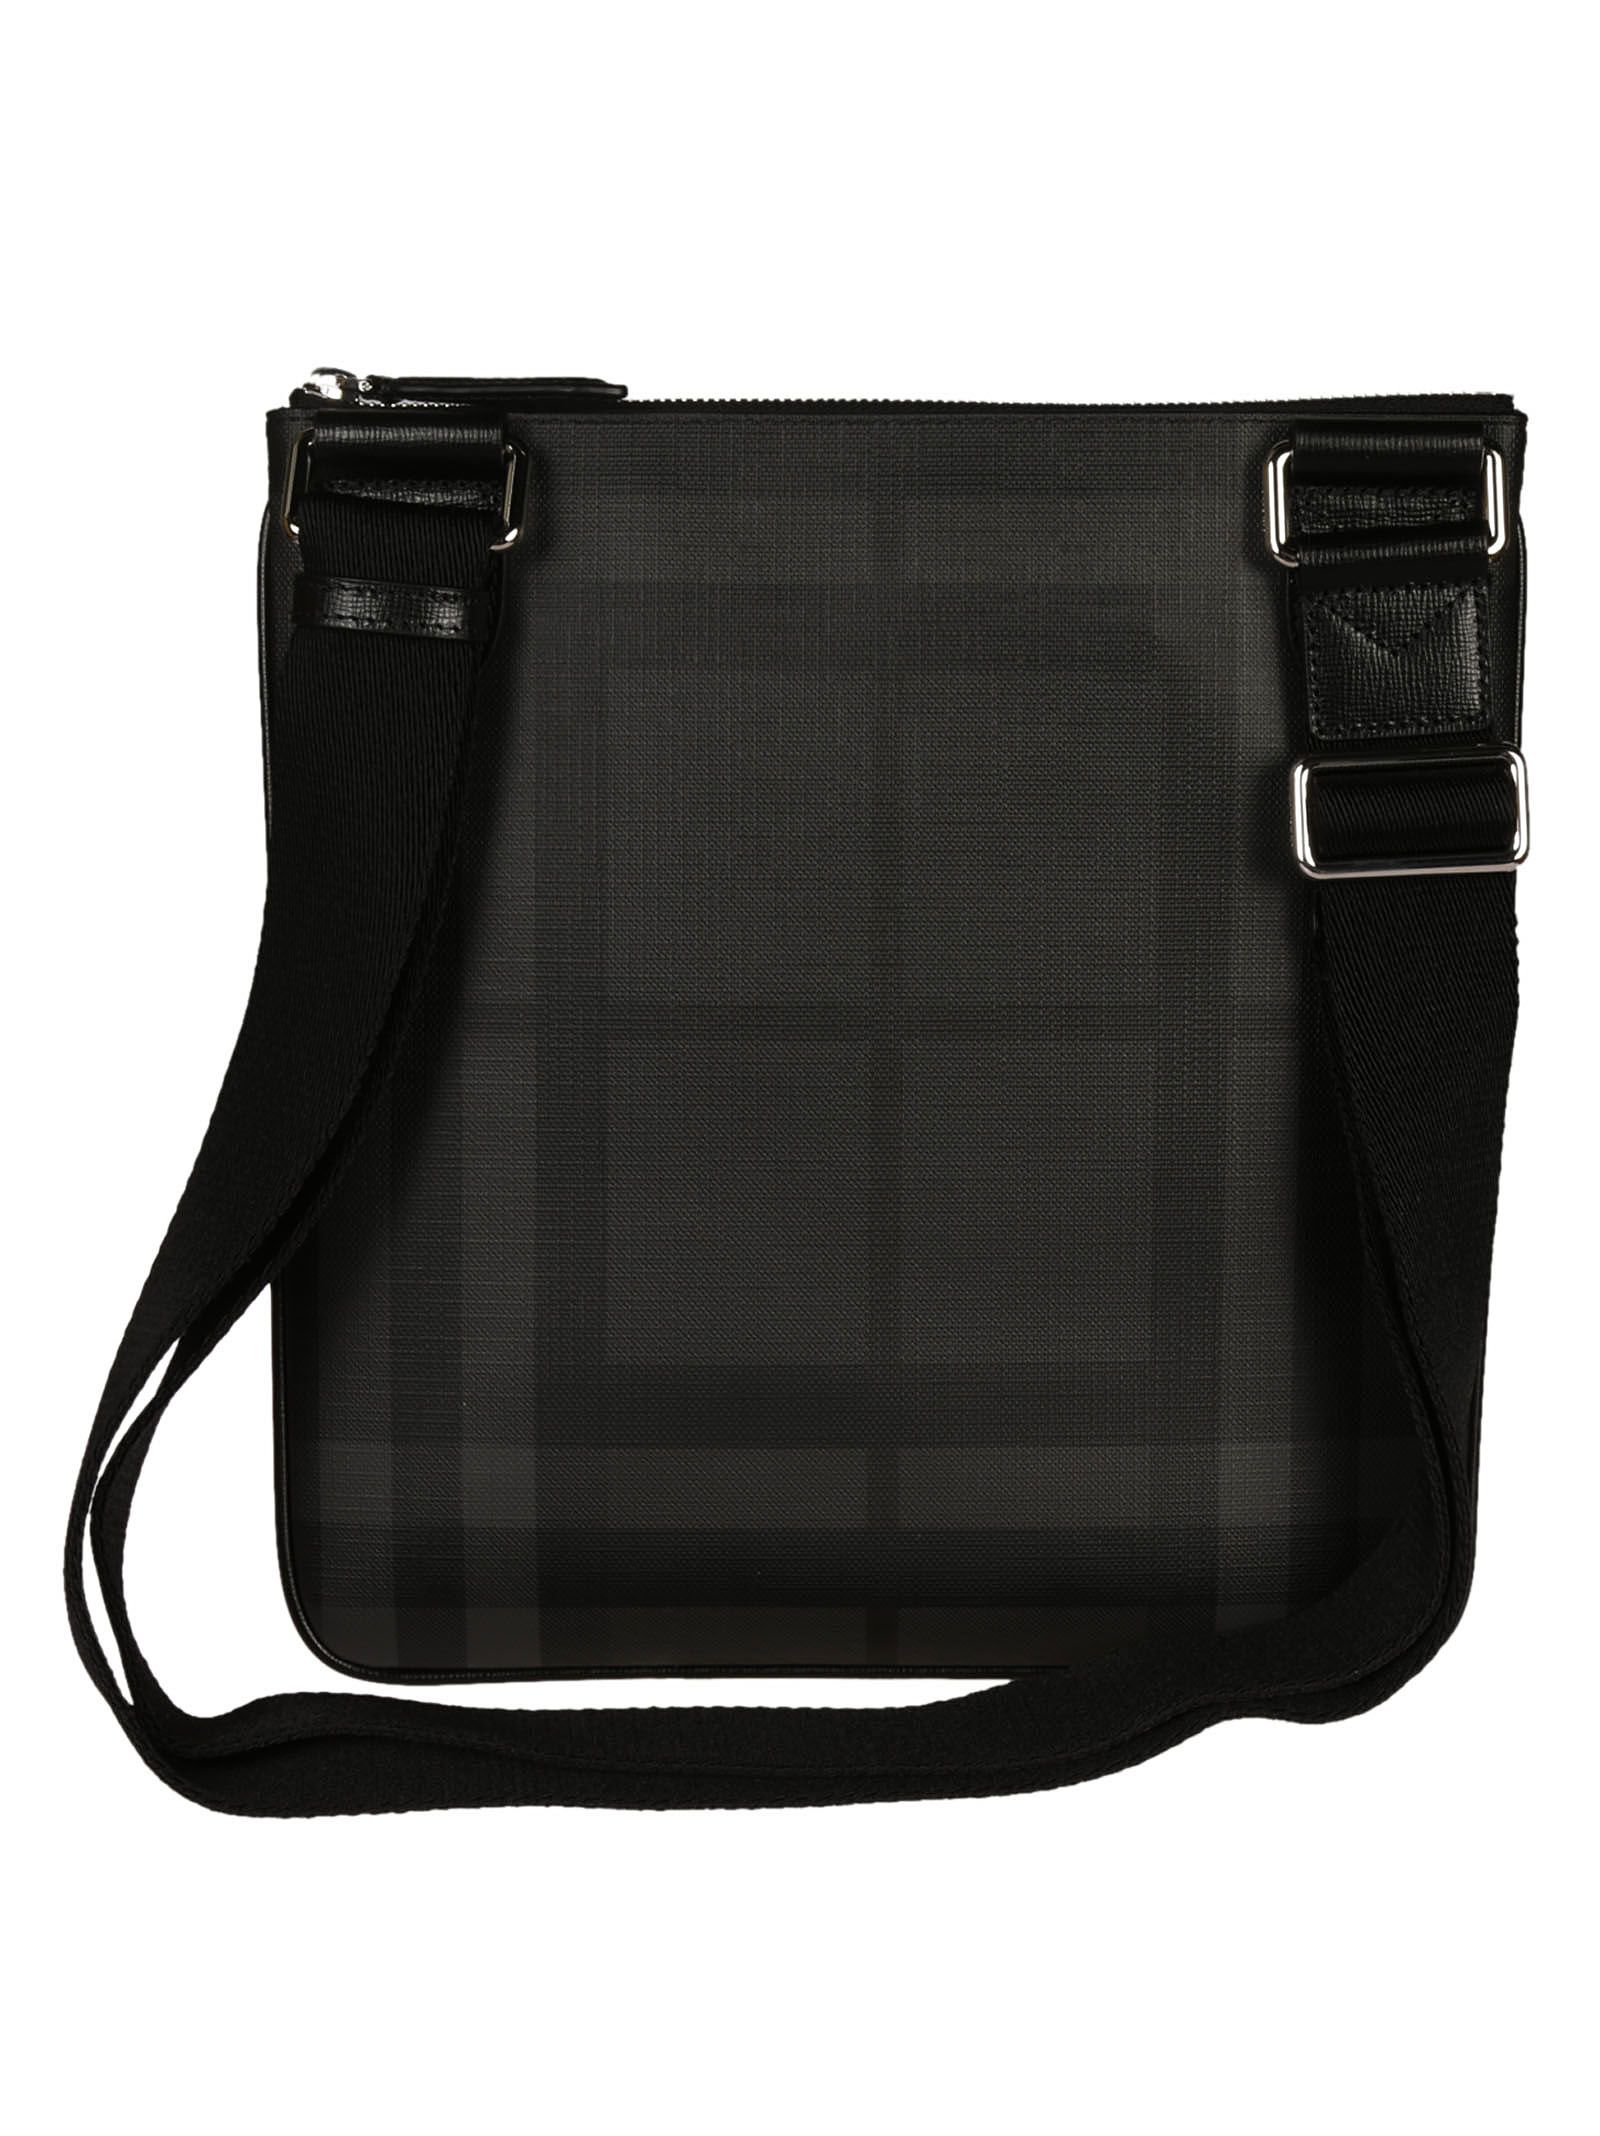 italist | Best price in the market for Burberry Burberry London Check Crossbody Bag - Charcoal ...